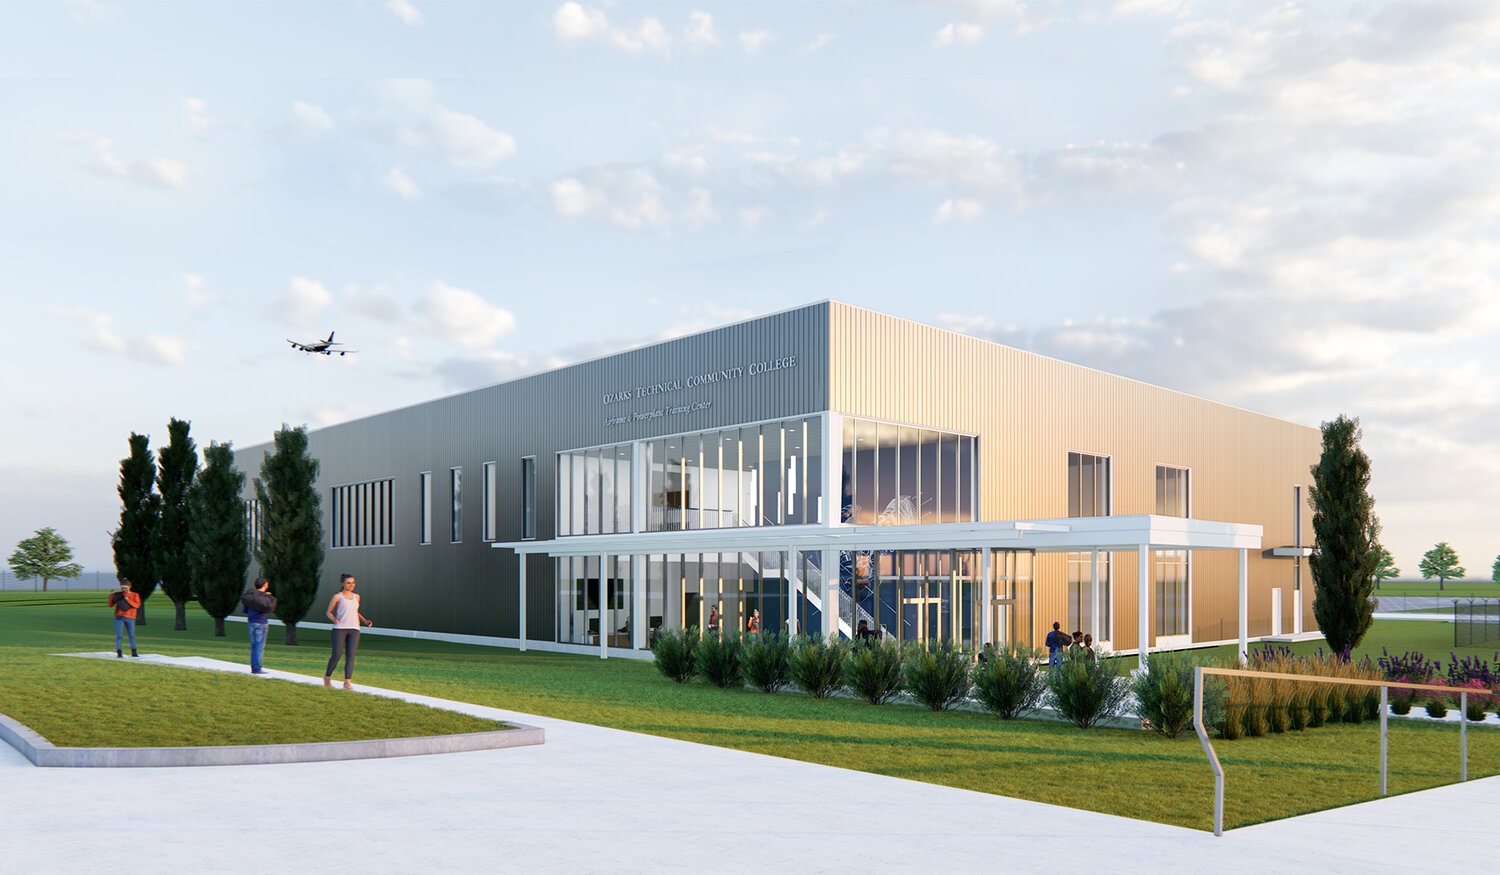 The building will be used for OTC's airframe and powerplant program, which is scheduled to debut in 2025.